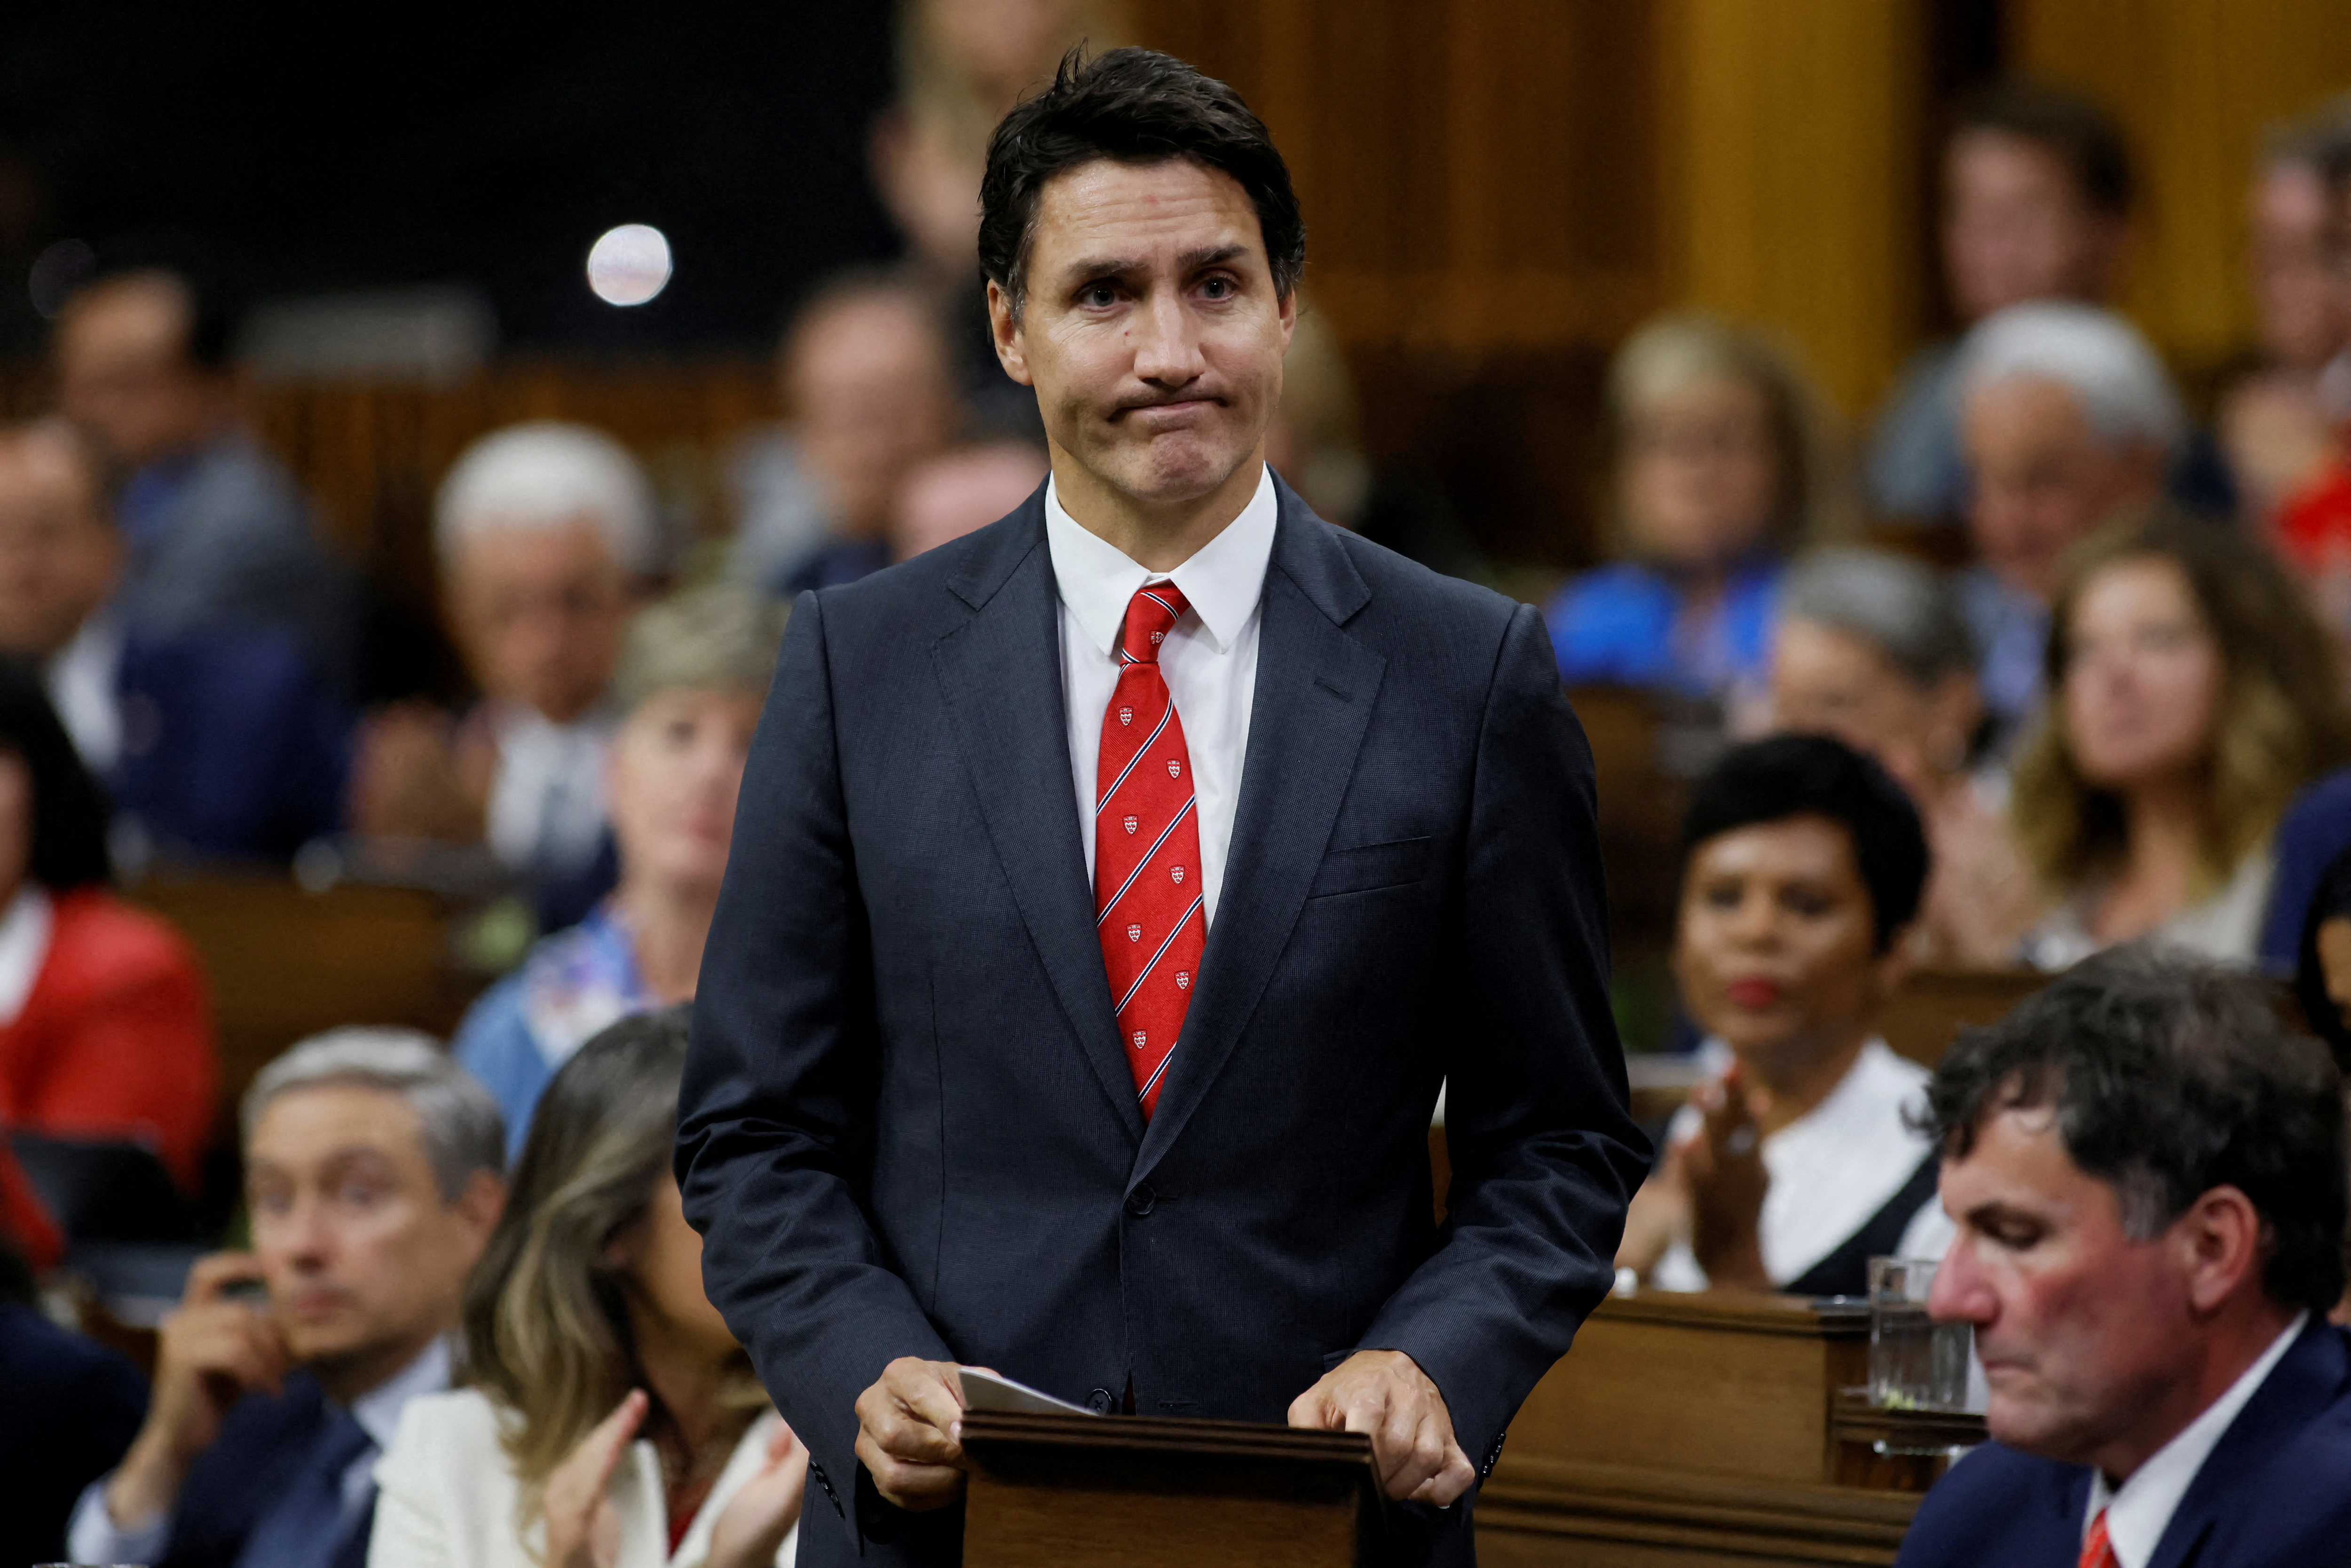 Canada's Prime Minister Justin Trudeau rises to make a statement in the House of Commons on Parliament Hill in Ottawa